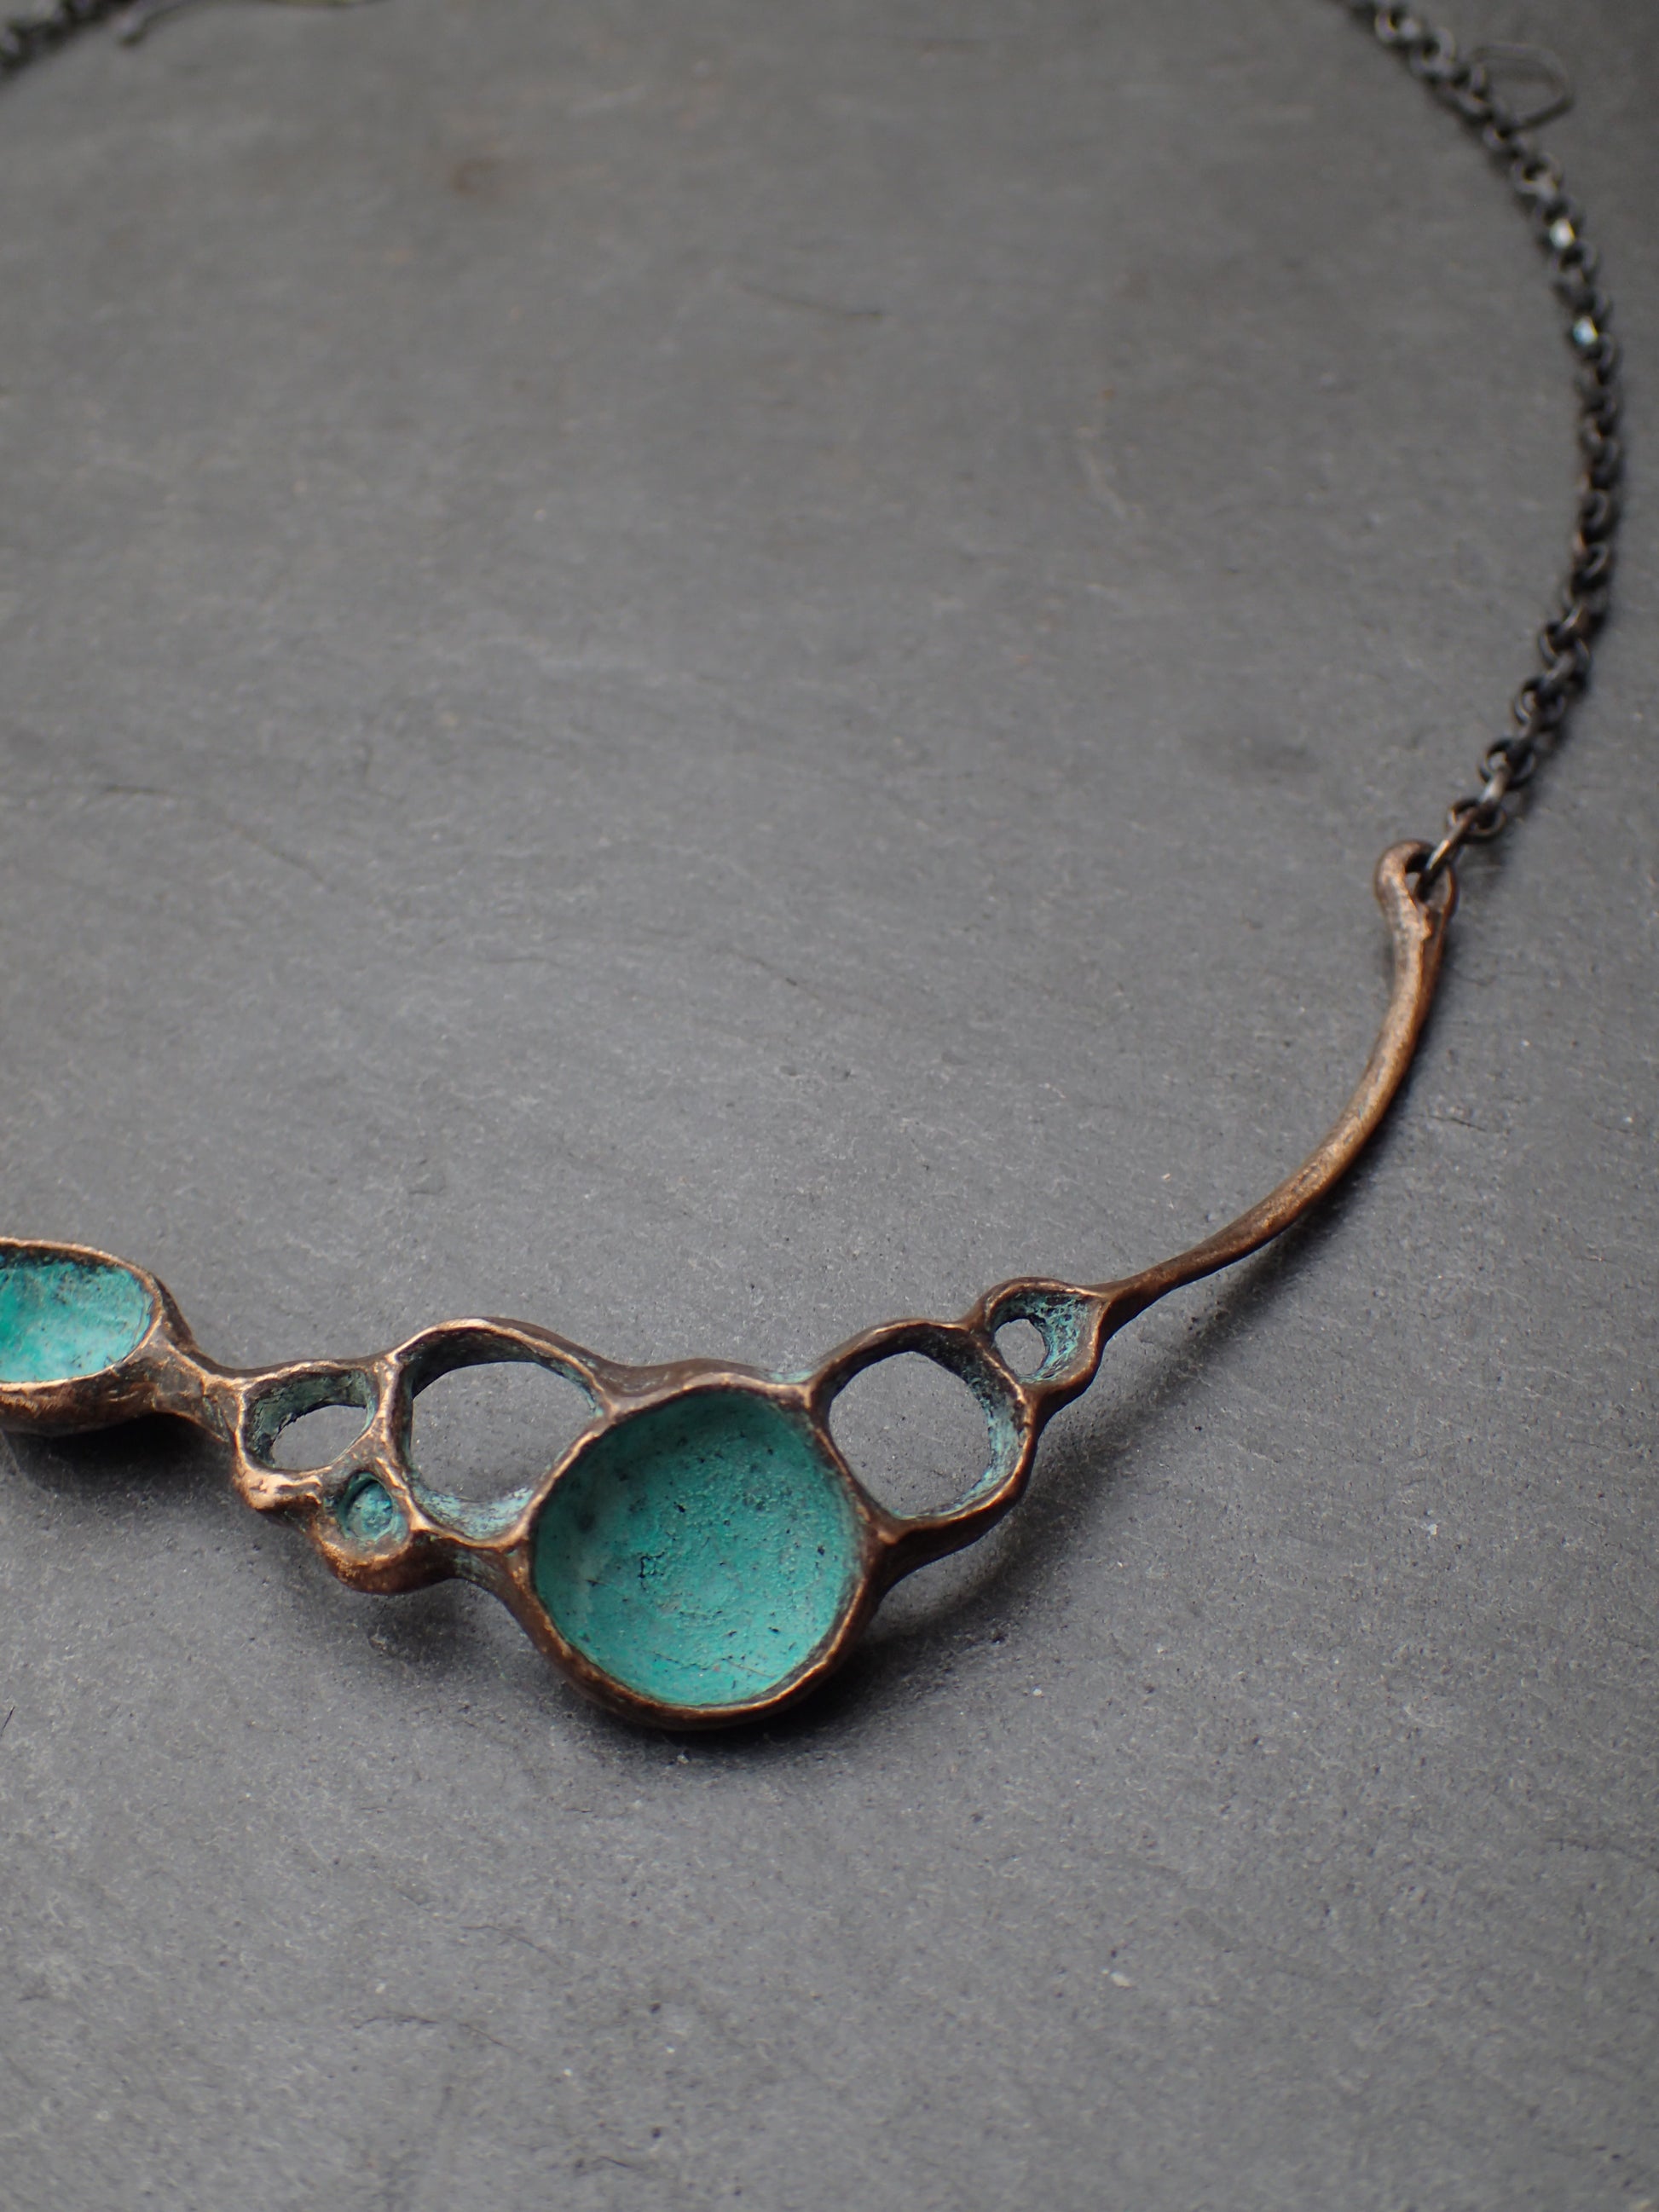 'Artefact' Necklace (delicate variation), Bronze with Turquiose patina, on 4mm silver chain.-Beca Beeby